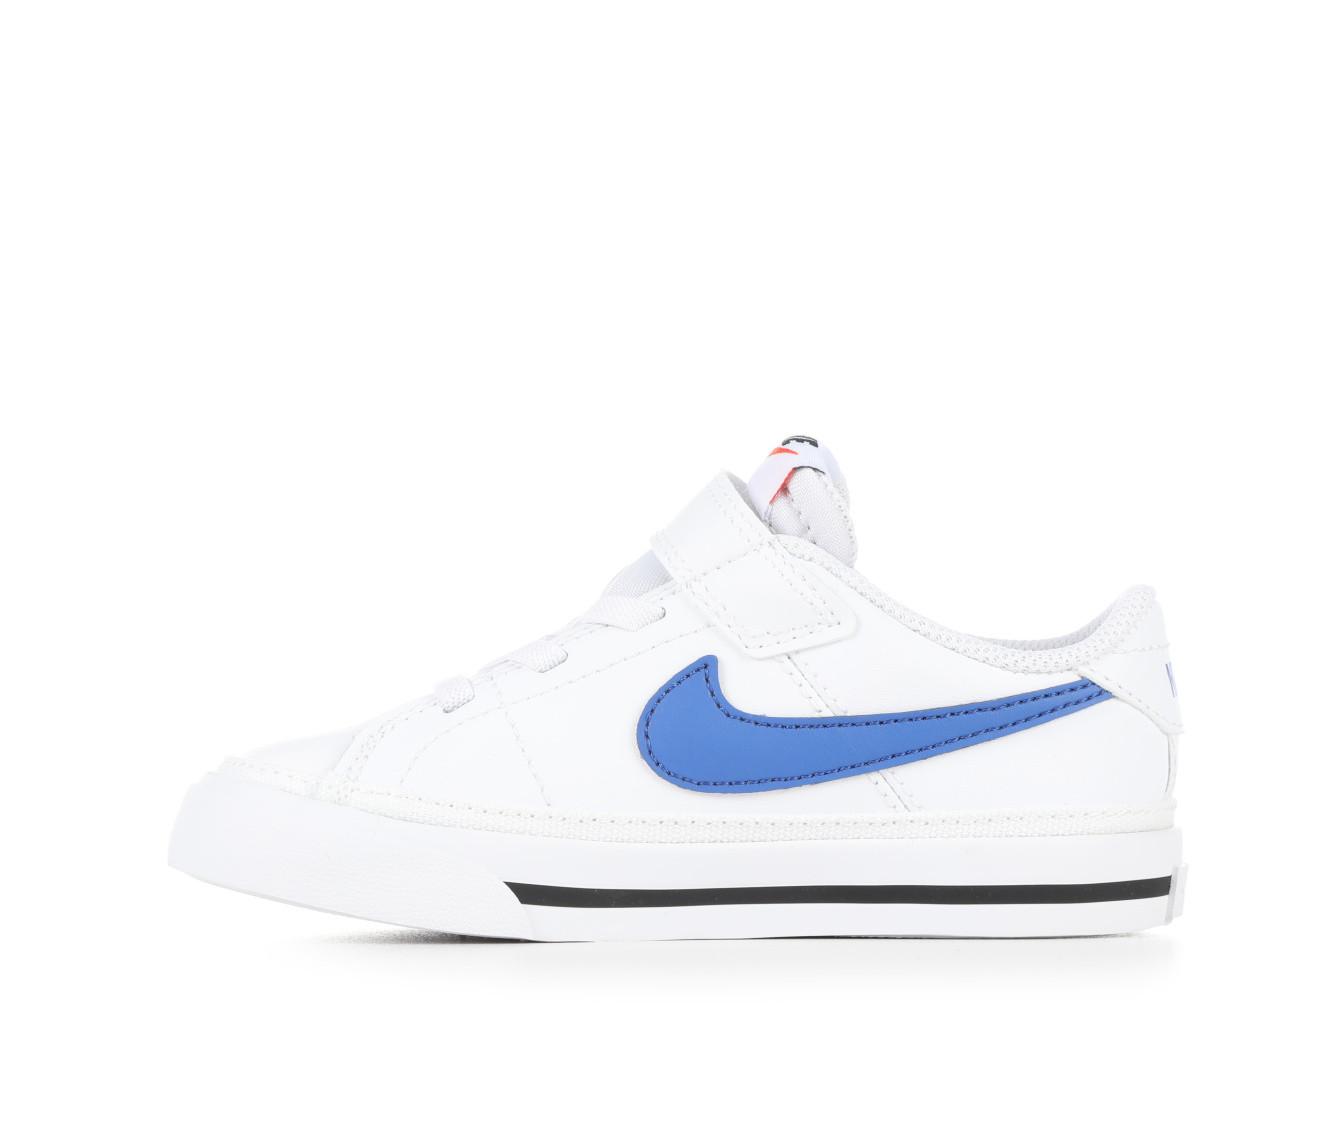 Kids' Nike Toddler Court Legacy Special Edition Sneakers